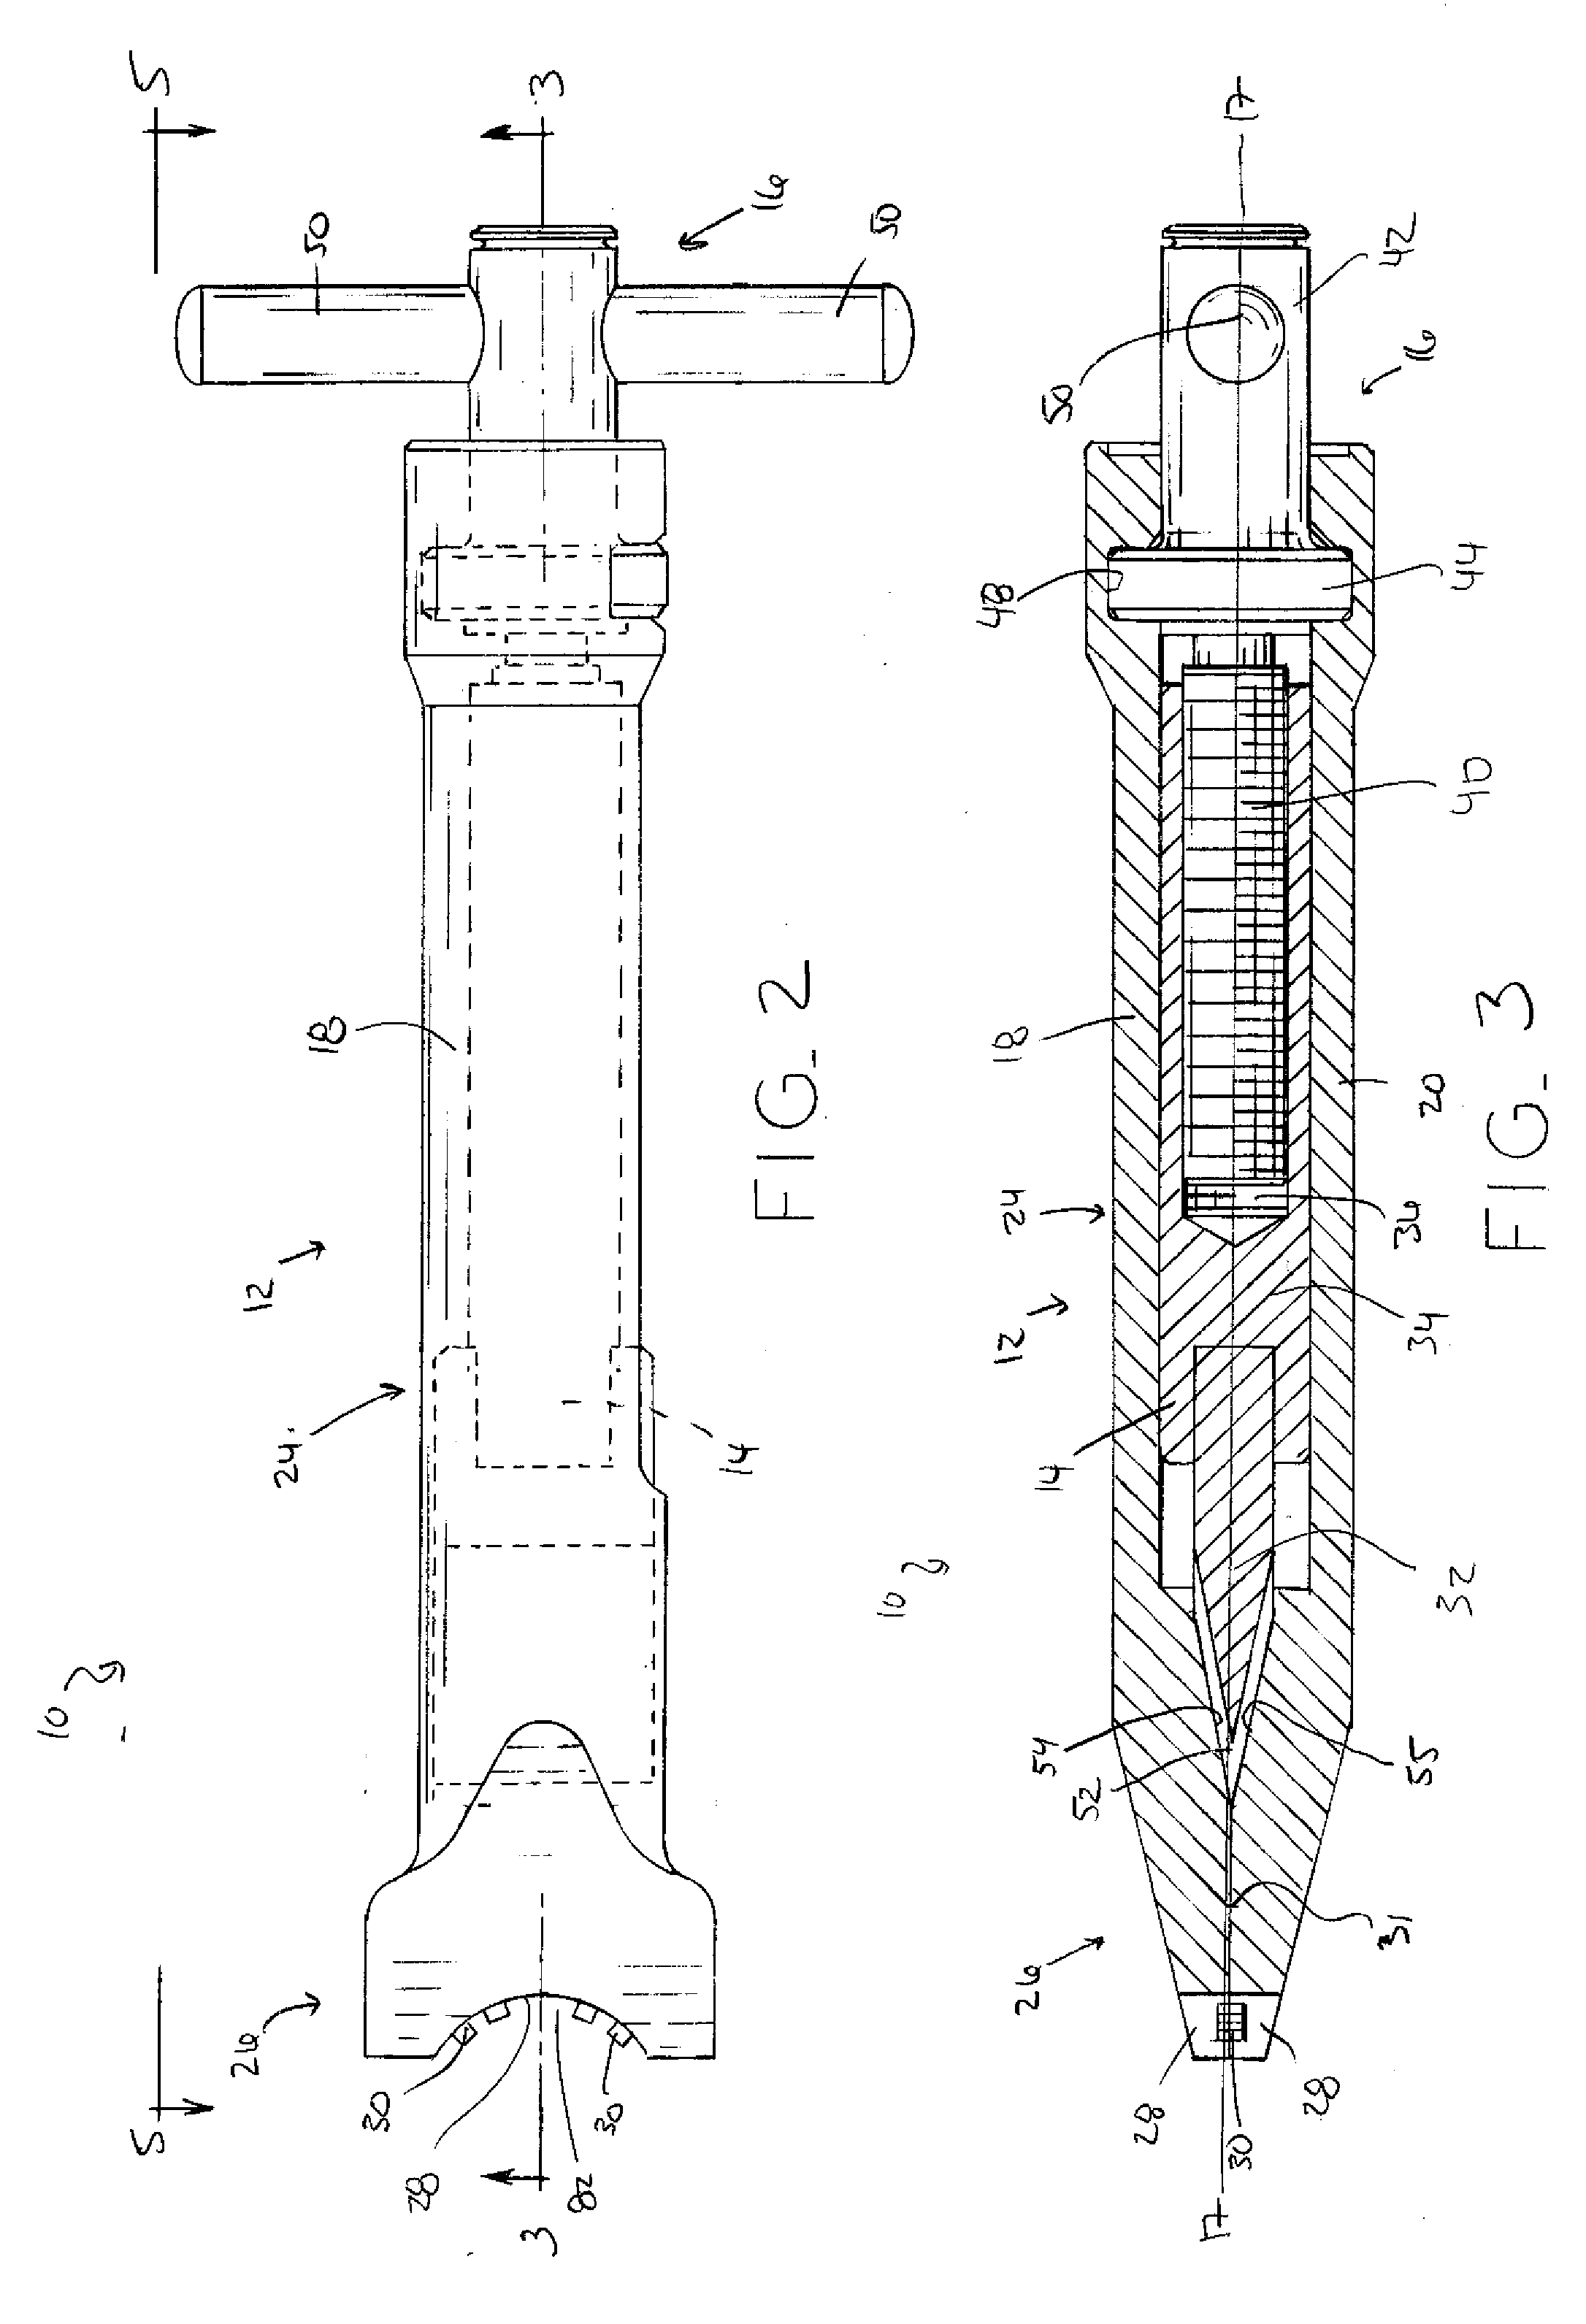 Orthopedic tool for altering the connection between orthopedic components